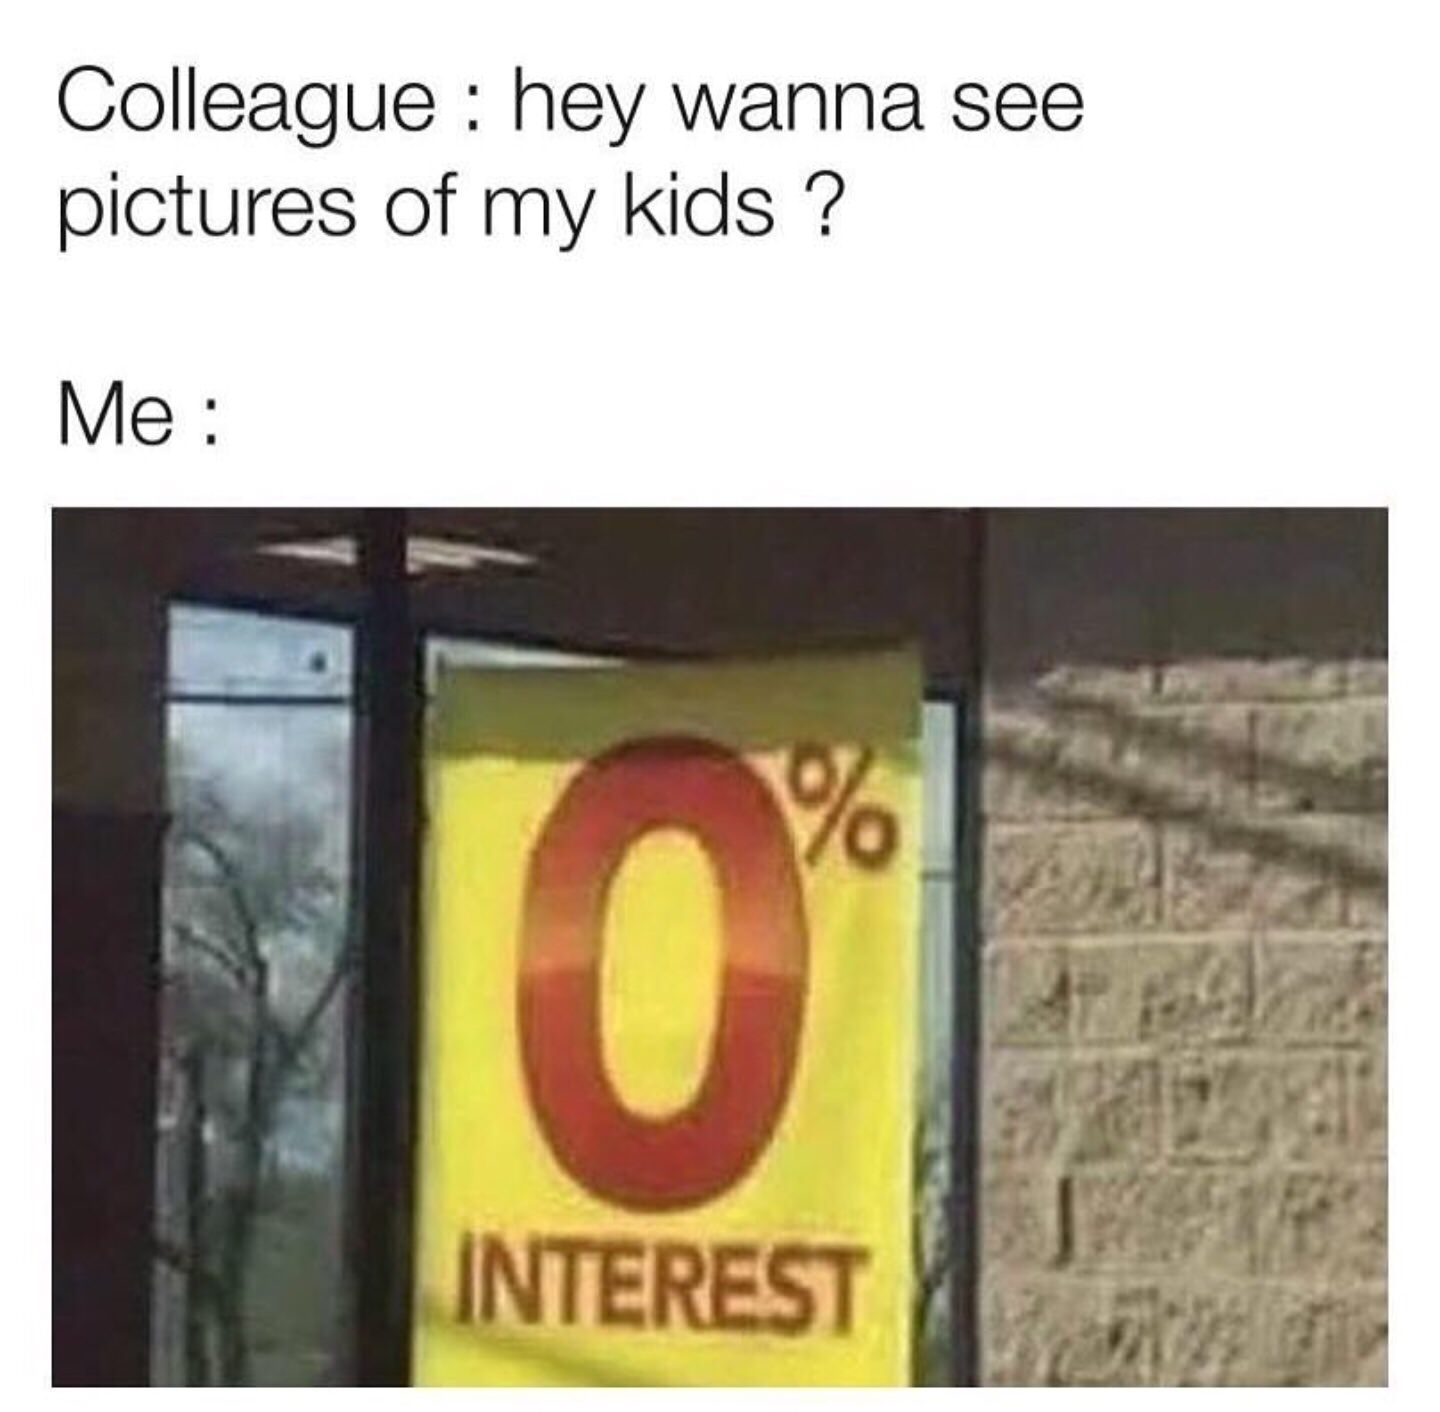 memes-  0% interest meme - Colleague hey wanna see pictures of my kids ? Me Interest